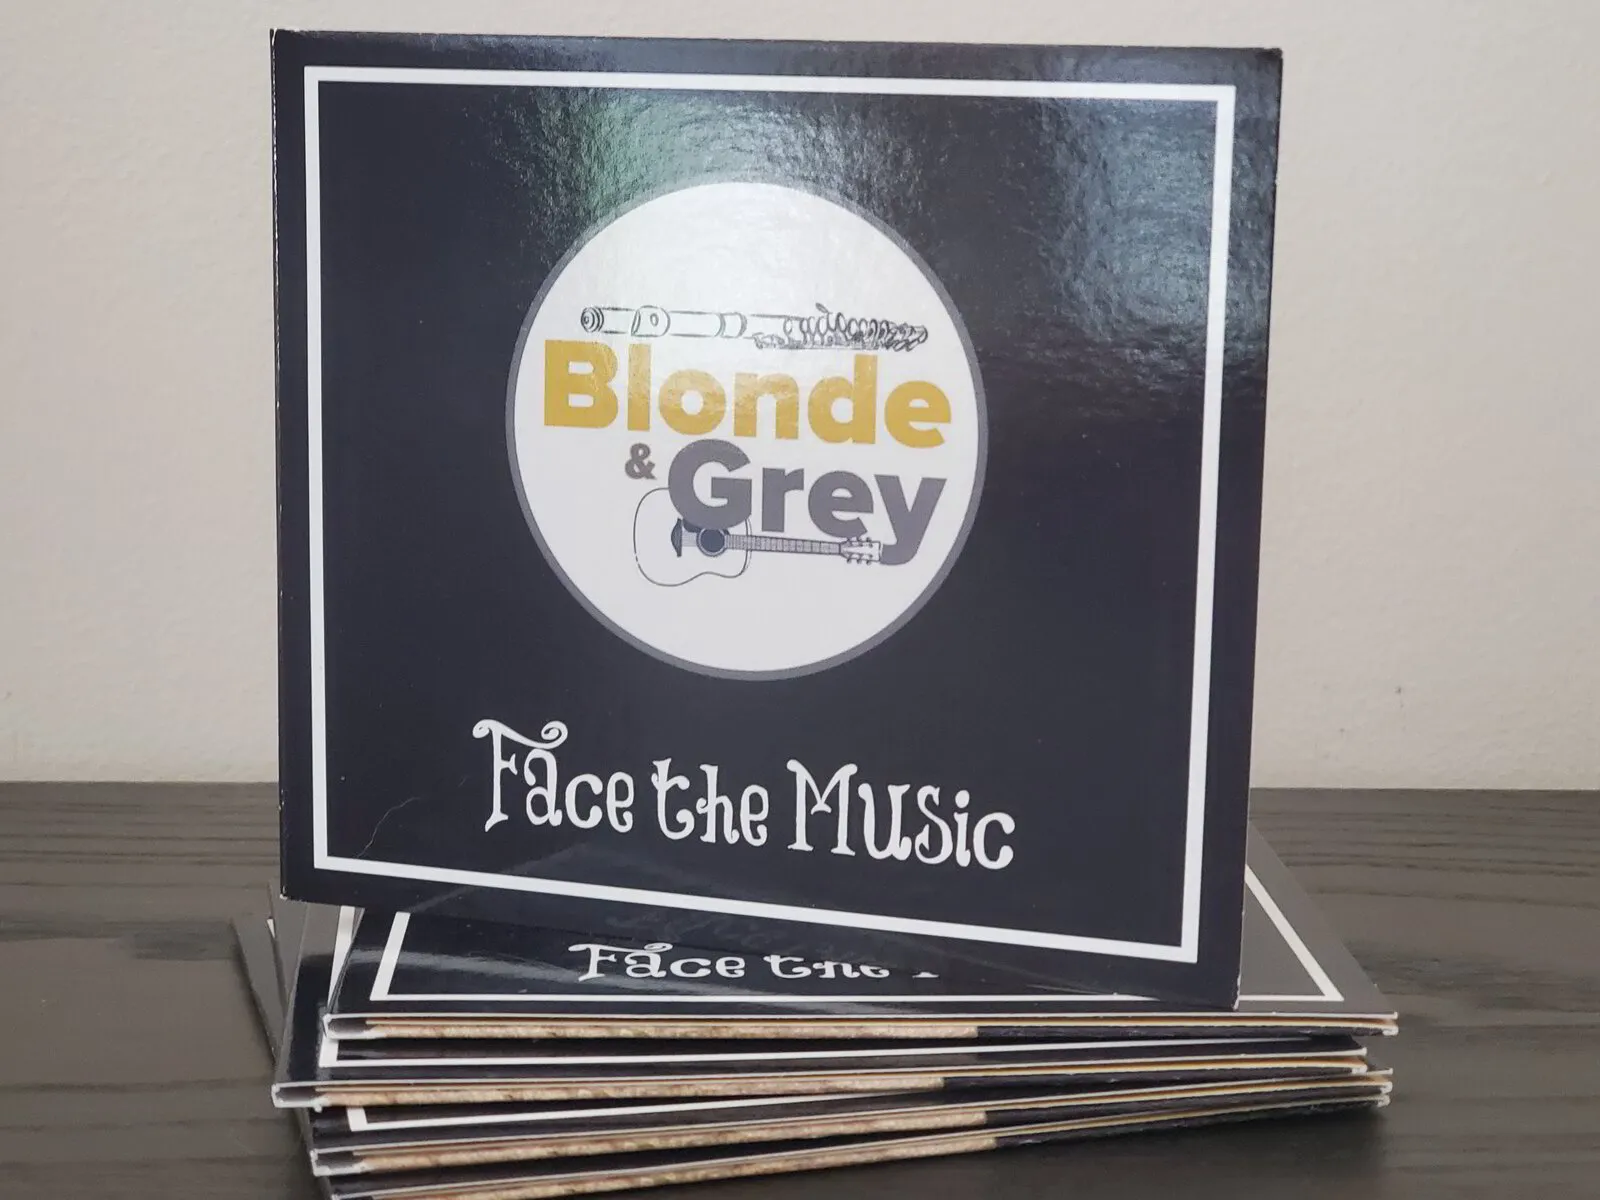 Blonde & Grey Face the Music CD